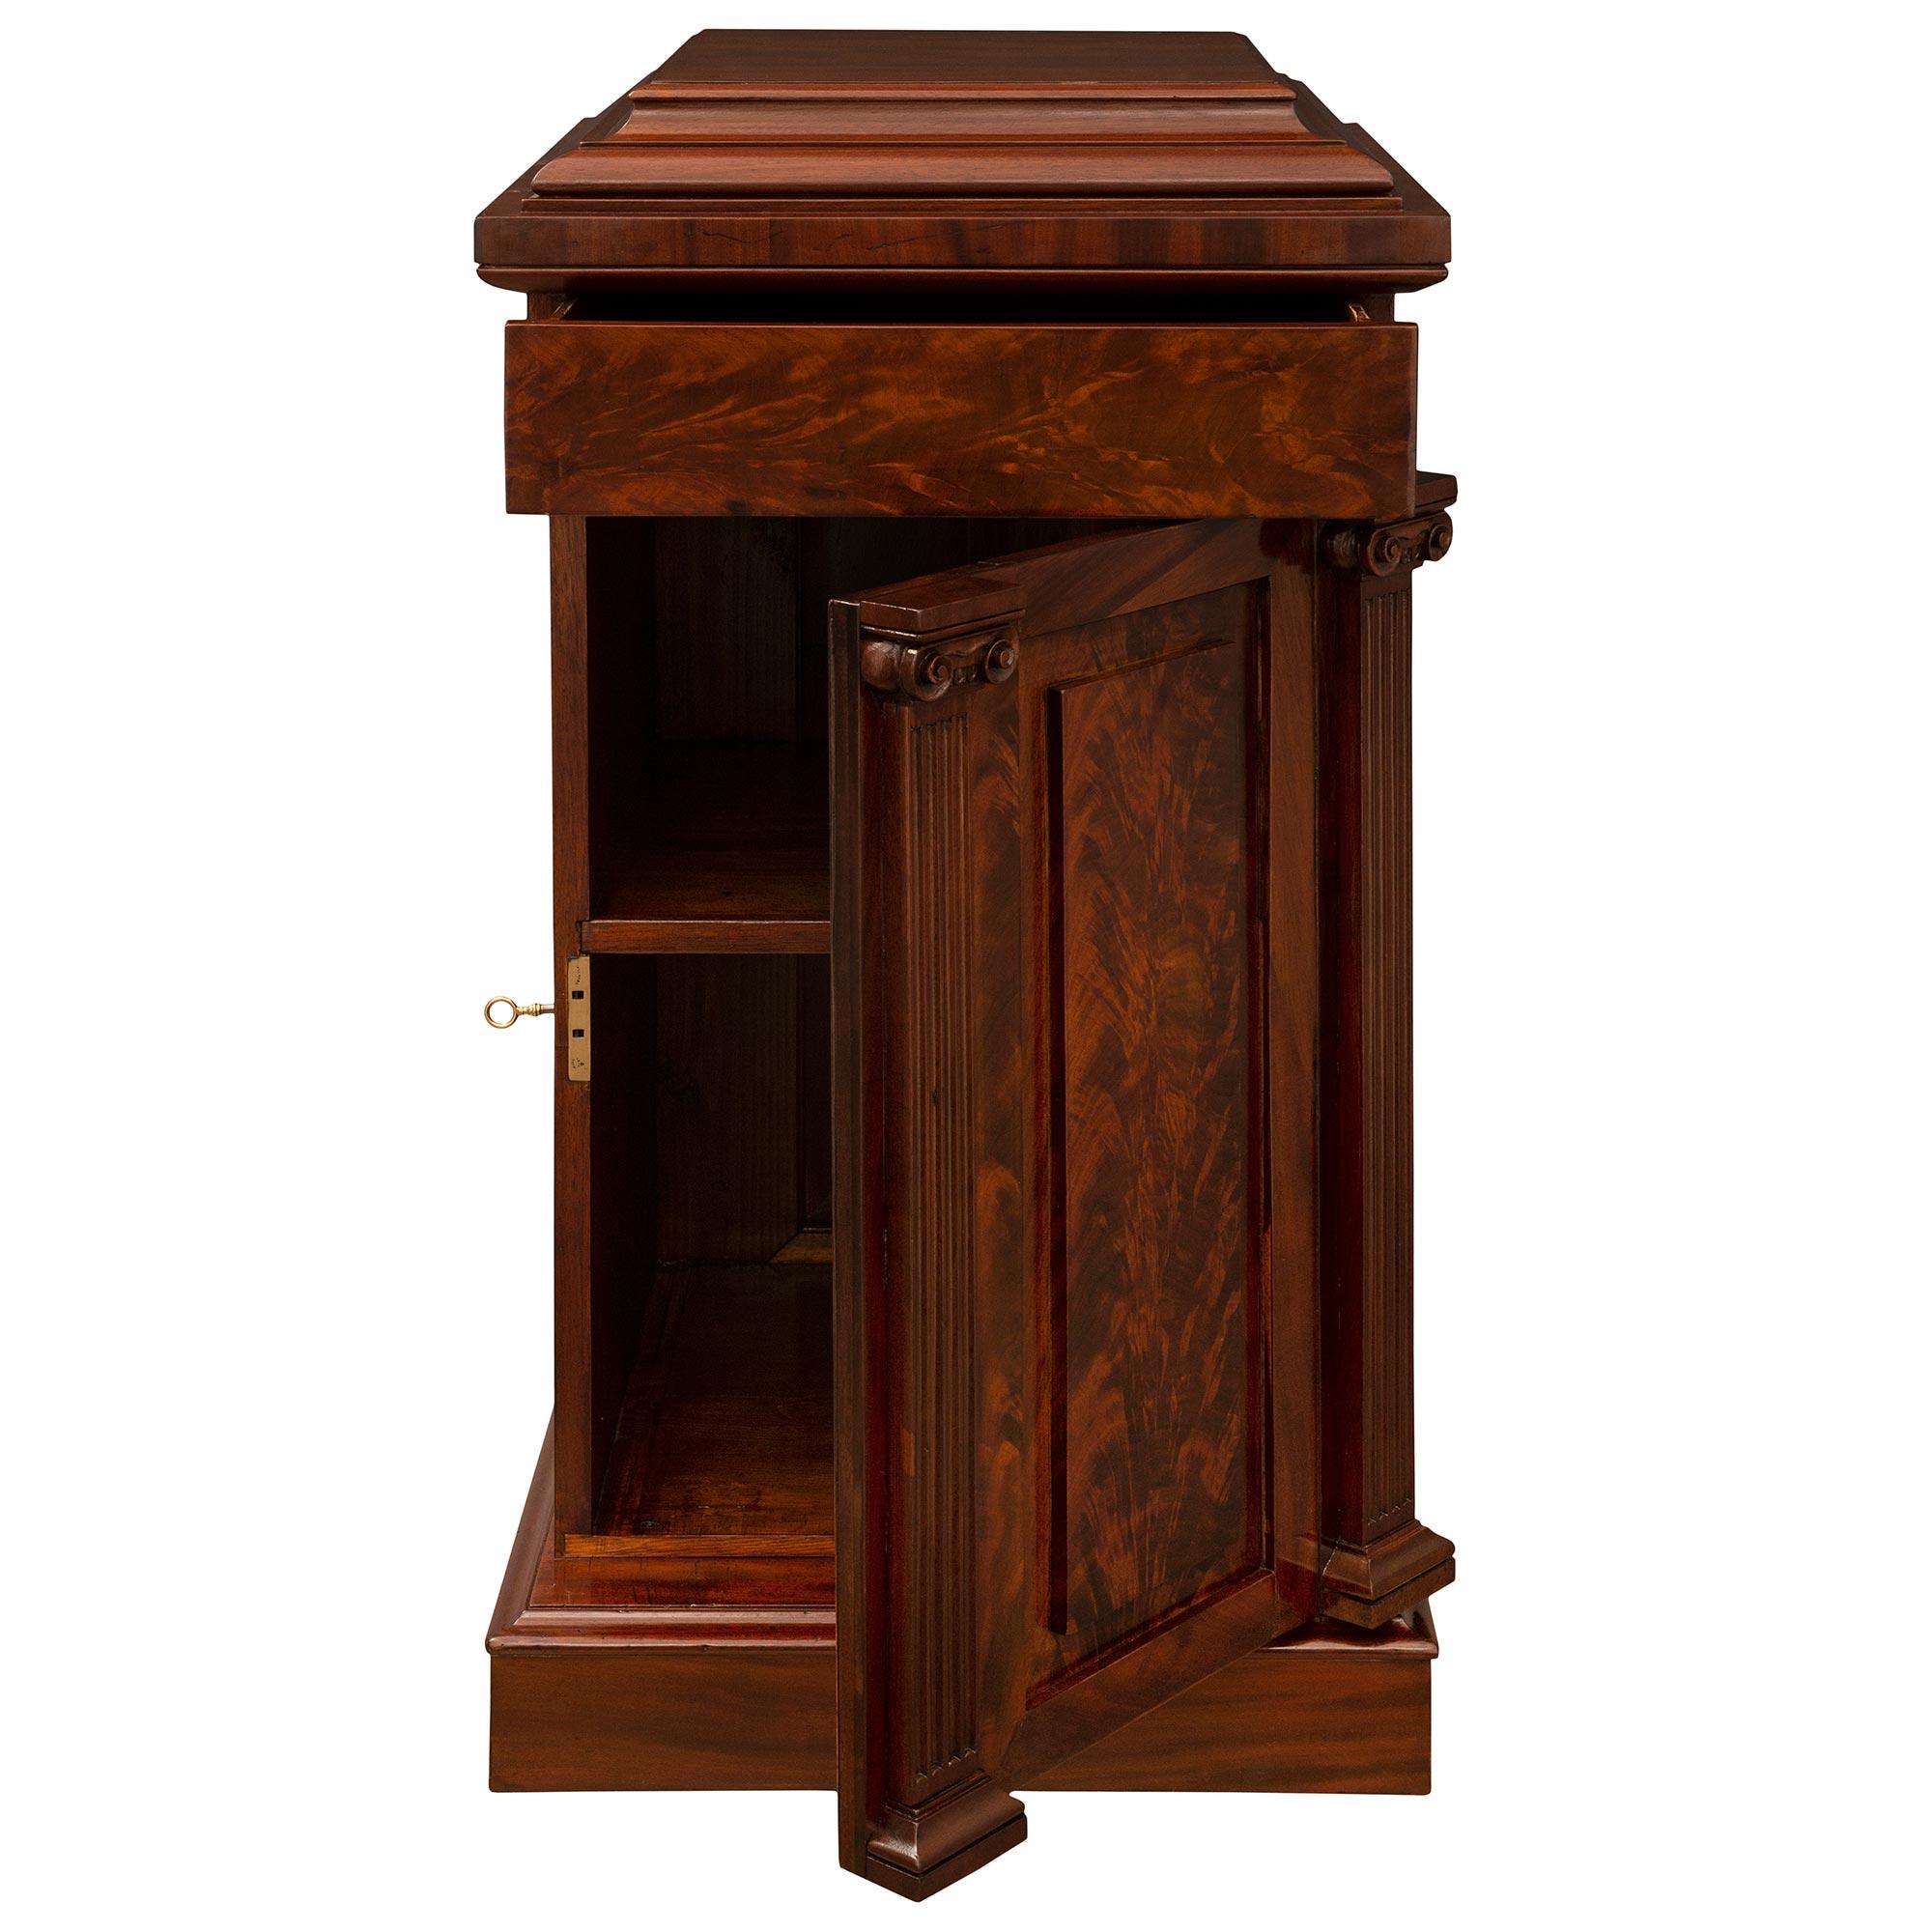 An impressive and extremely decorative large scale true pair of English 19th century Regency period flamed Mahogany pedestal columns. Each one door one drawer pedestal is raised by a straight square base with a fine wrap around mottled border. At